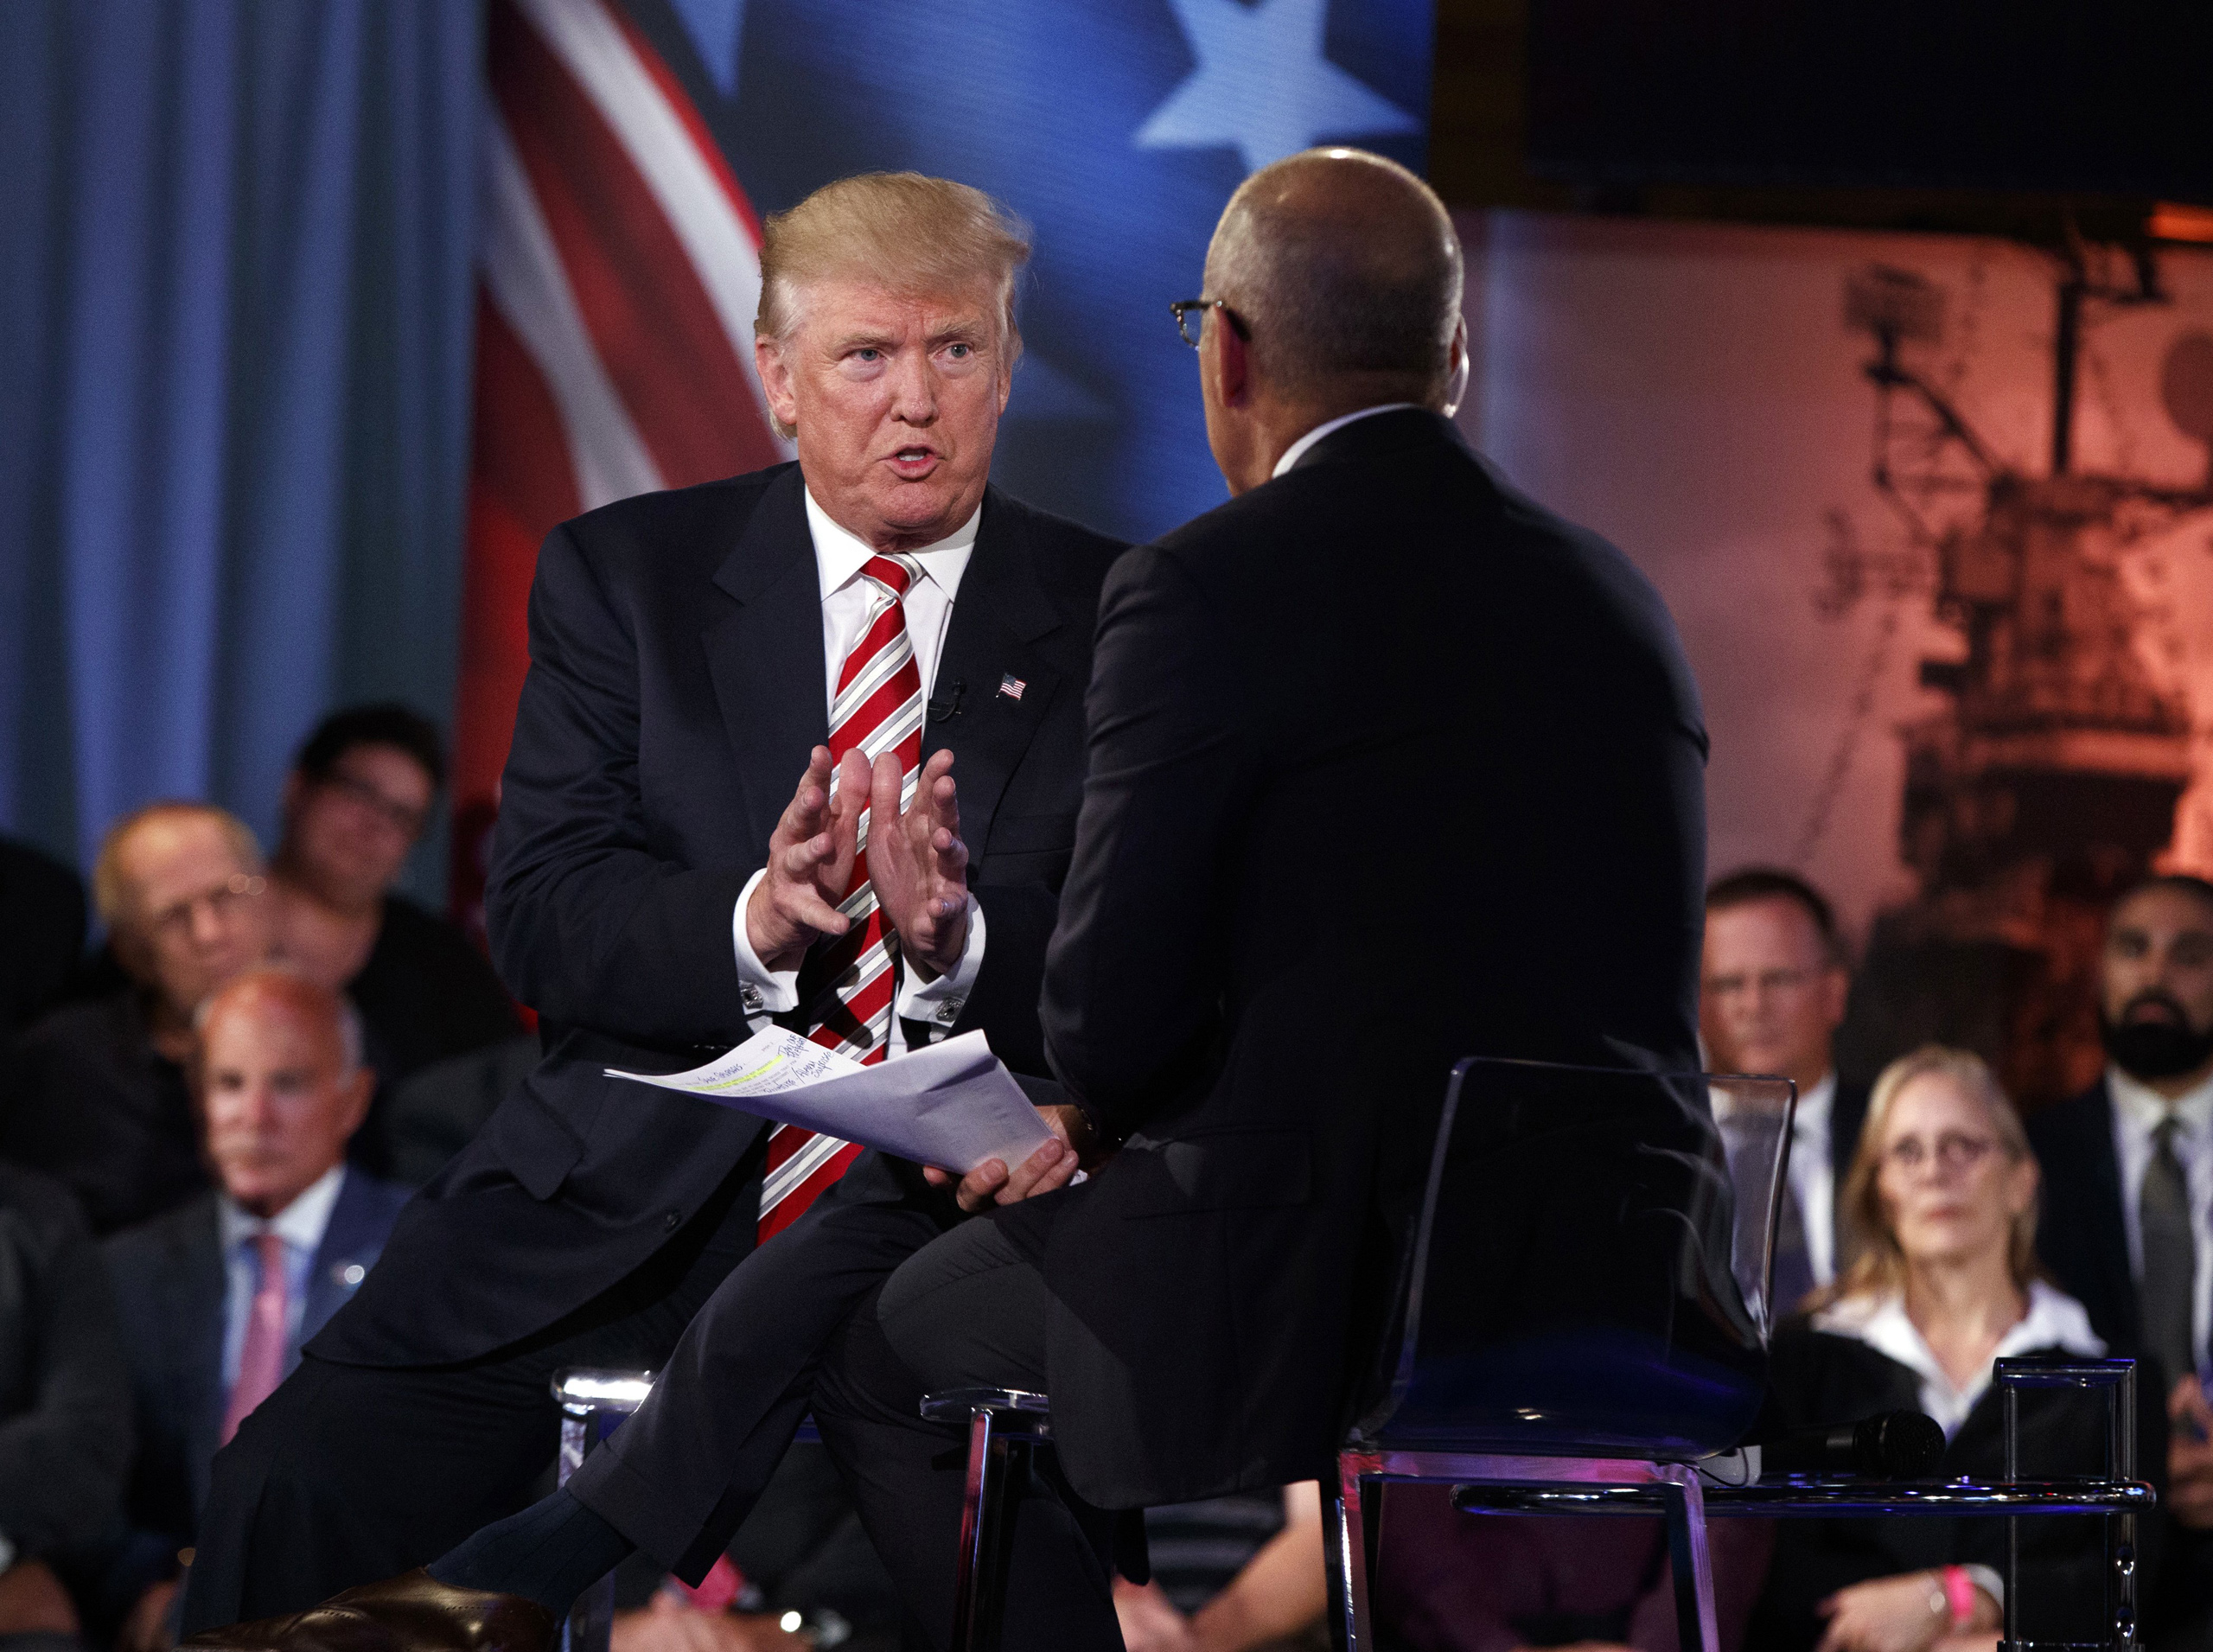 Republican presidential candidate Donald Trump speaks with 'Today' show co-anchor Matt Lauer at the NBC Commander-In-Chief Forum held at the Intrepid Sea, Air and Space museum aboard the decommissioned aircraft carrier Intrepid, New York City on Sept. 7, 2016. (Evan Vucci—AP)